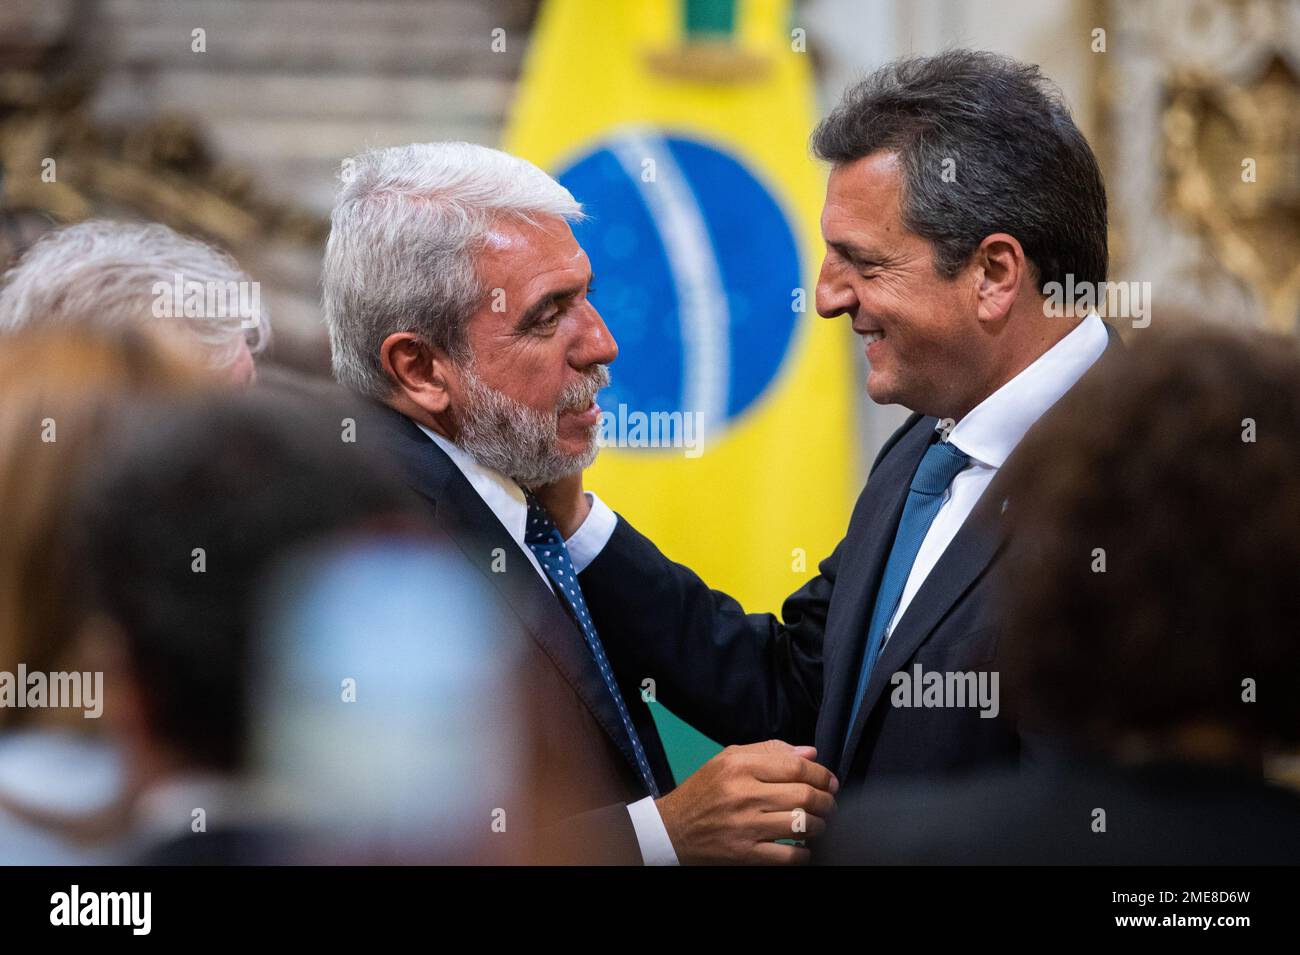 Buenos Aires, Argentina. 23rd Jan, 2023. Anibal Fernandez (L), Minister of Security of the Argentine Nation speaks with the Minister of Economy Sergio Massa (R), during a press conference between Brazilian President Luiz Inacio Lula Da Silva and Argentina's President Alberto Fernandez at the government house in Buenos Aires. Credit: SOPA Images Limited/Alamy Live News Stock Photo